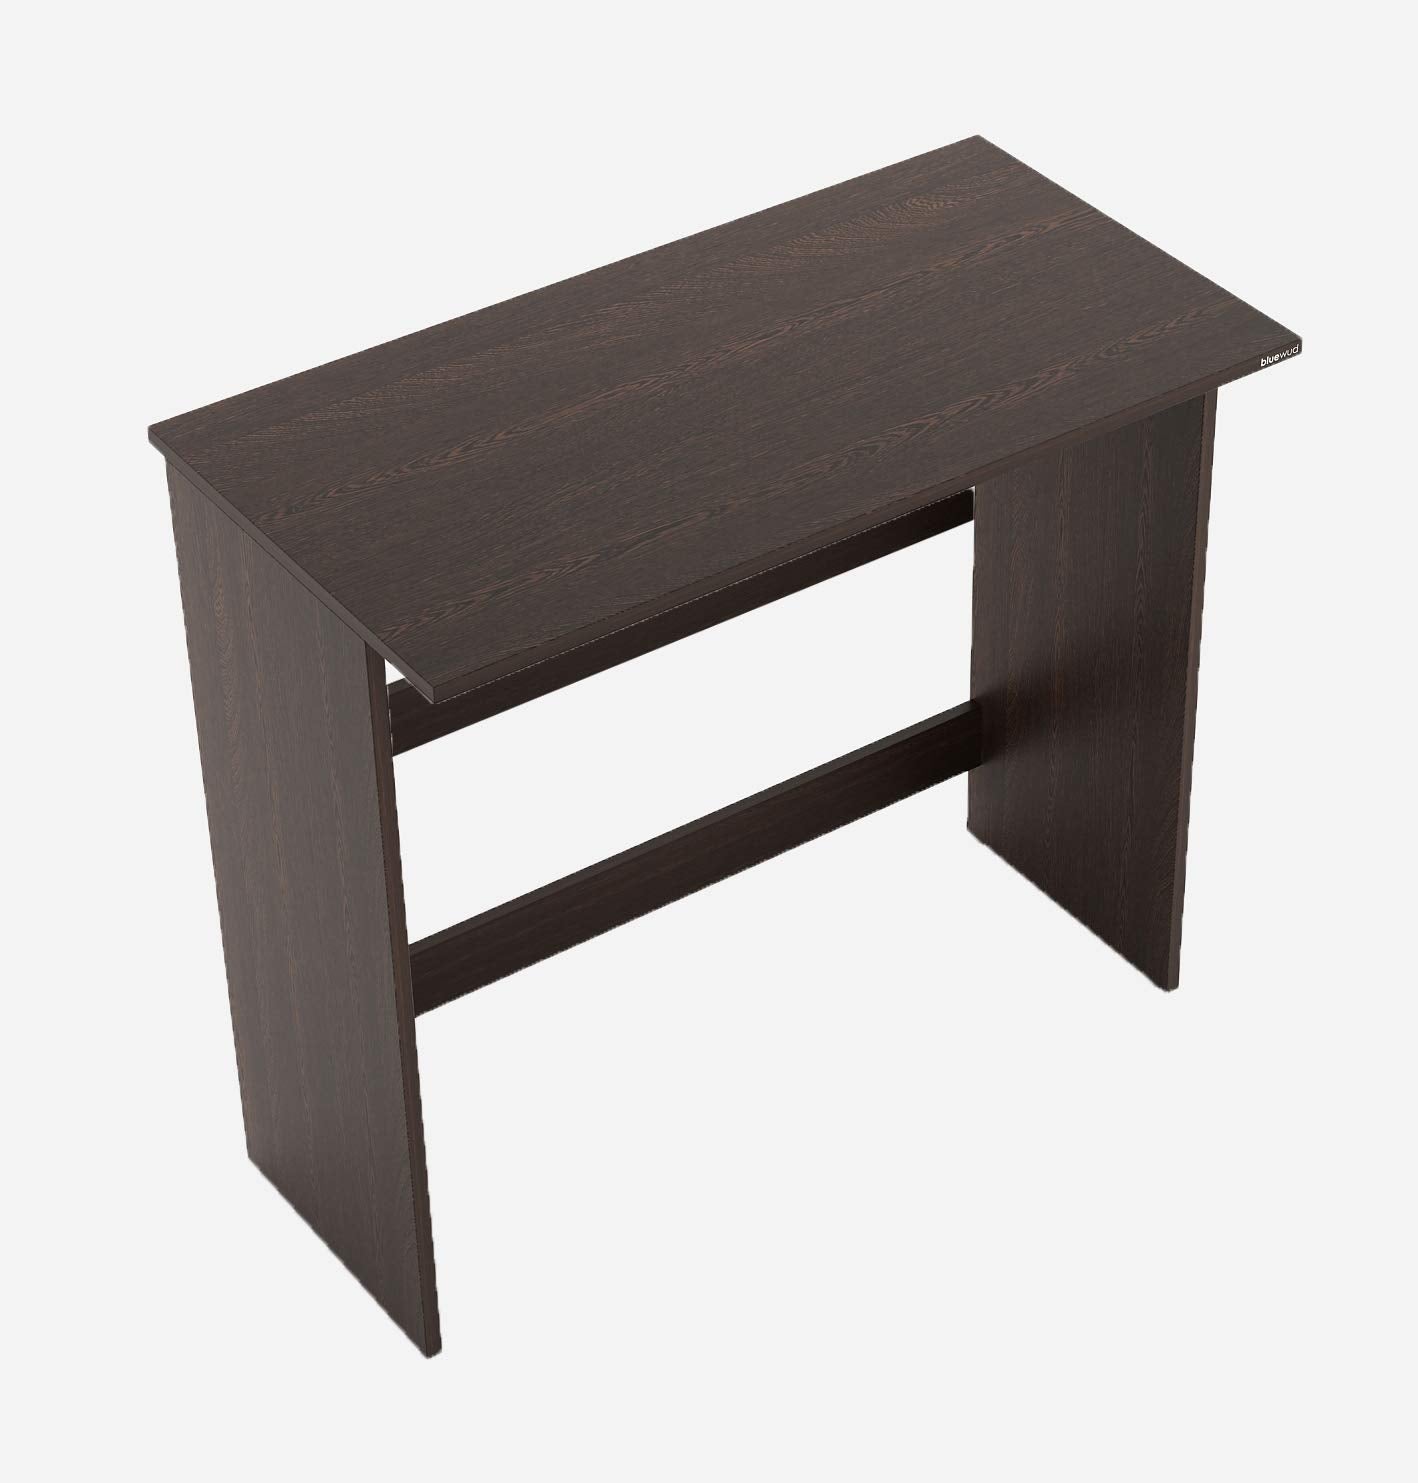 Study Table: Nard Study Table Desk for Home & Office (Large - Wenge)